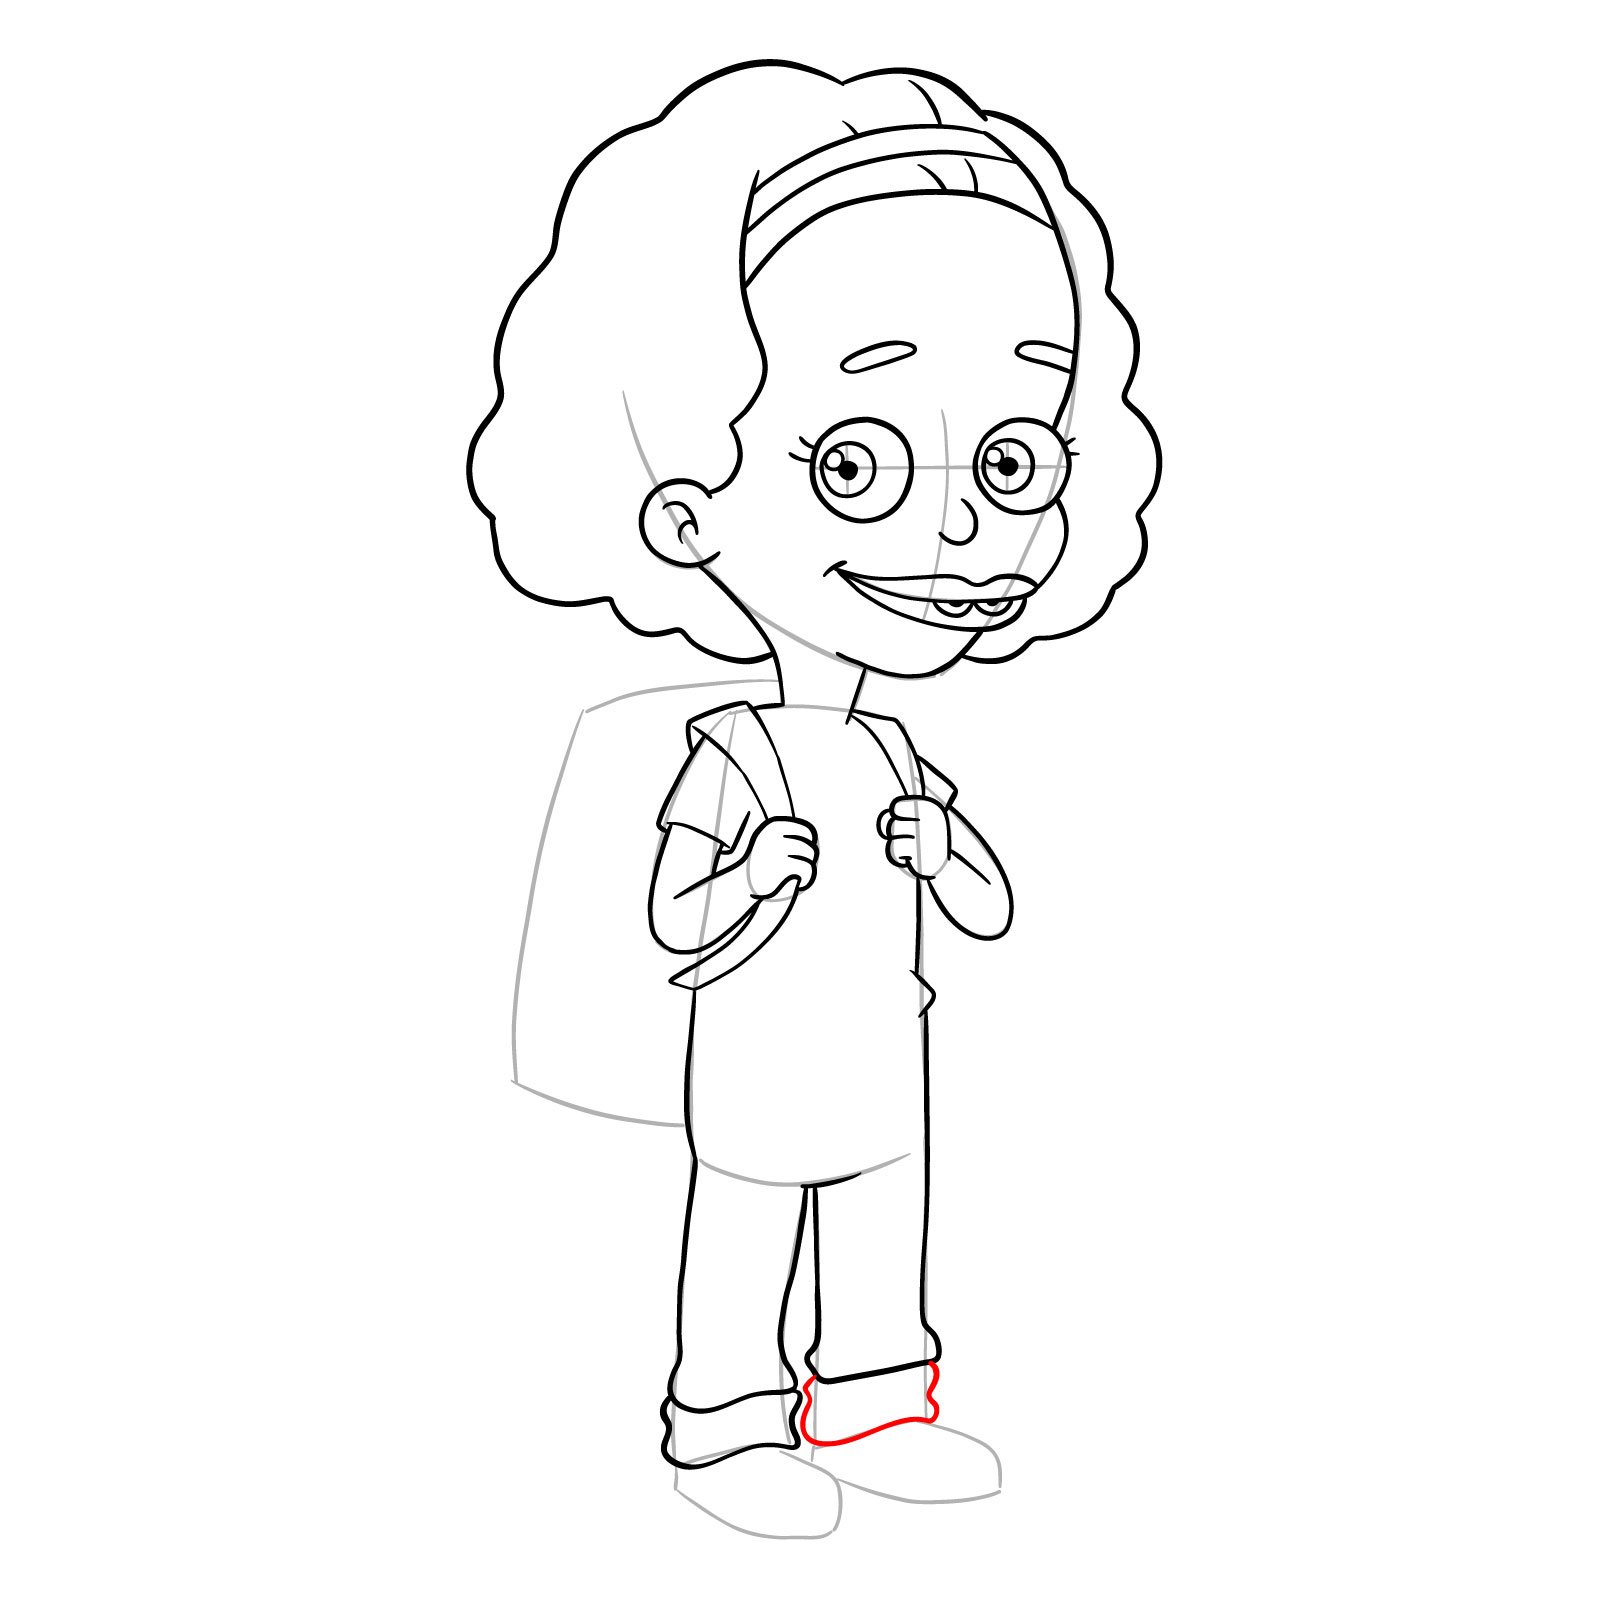 How to draw Missy from Big Mouth - step 22